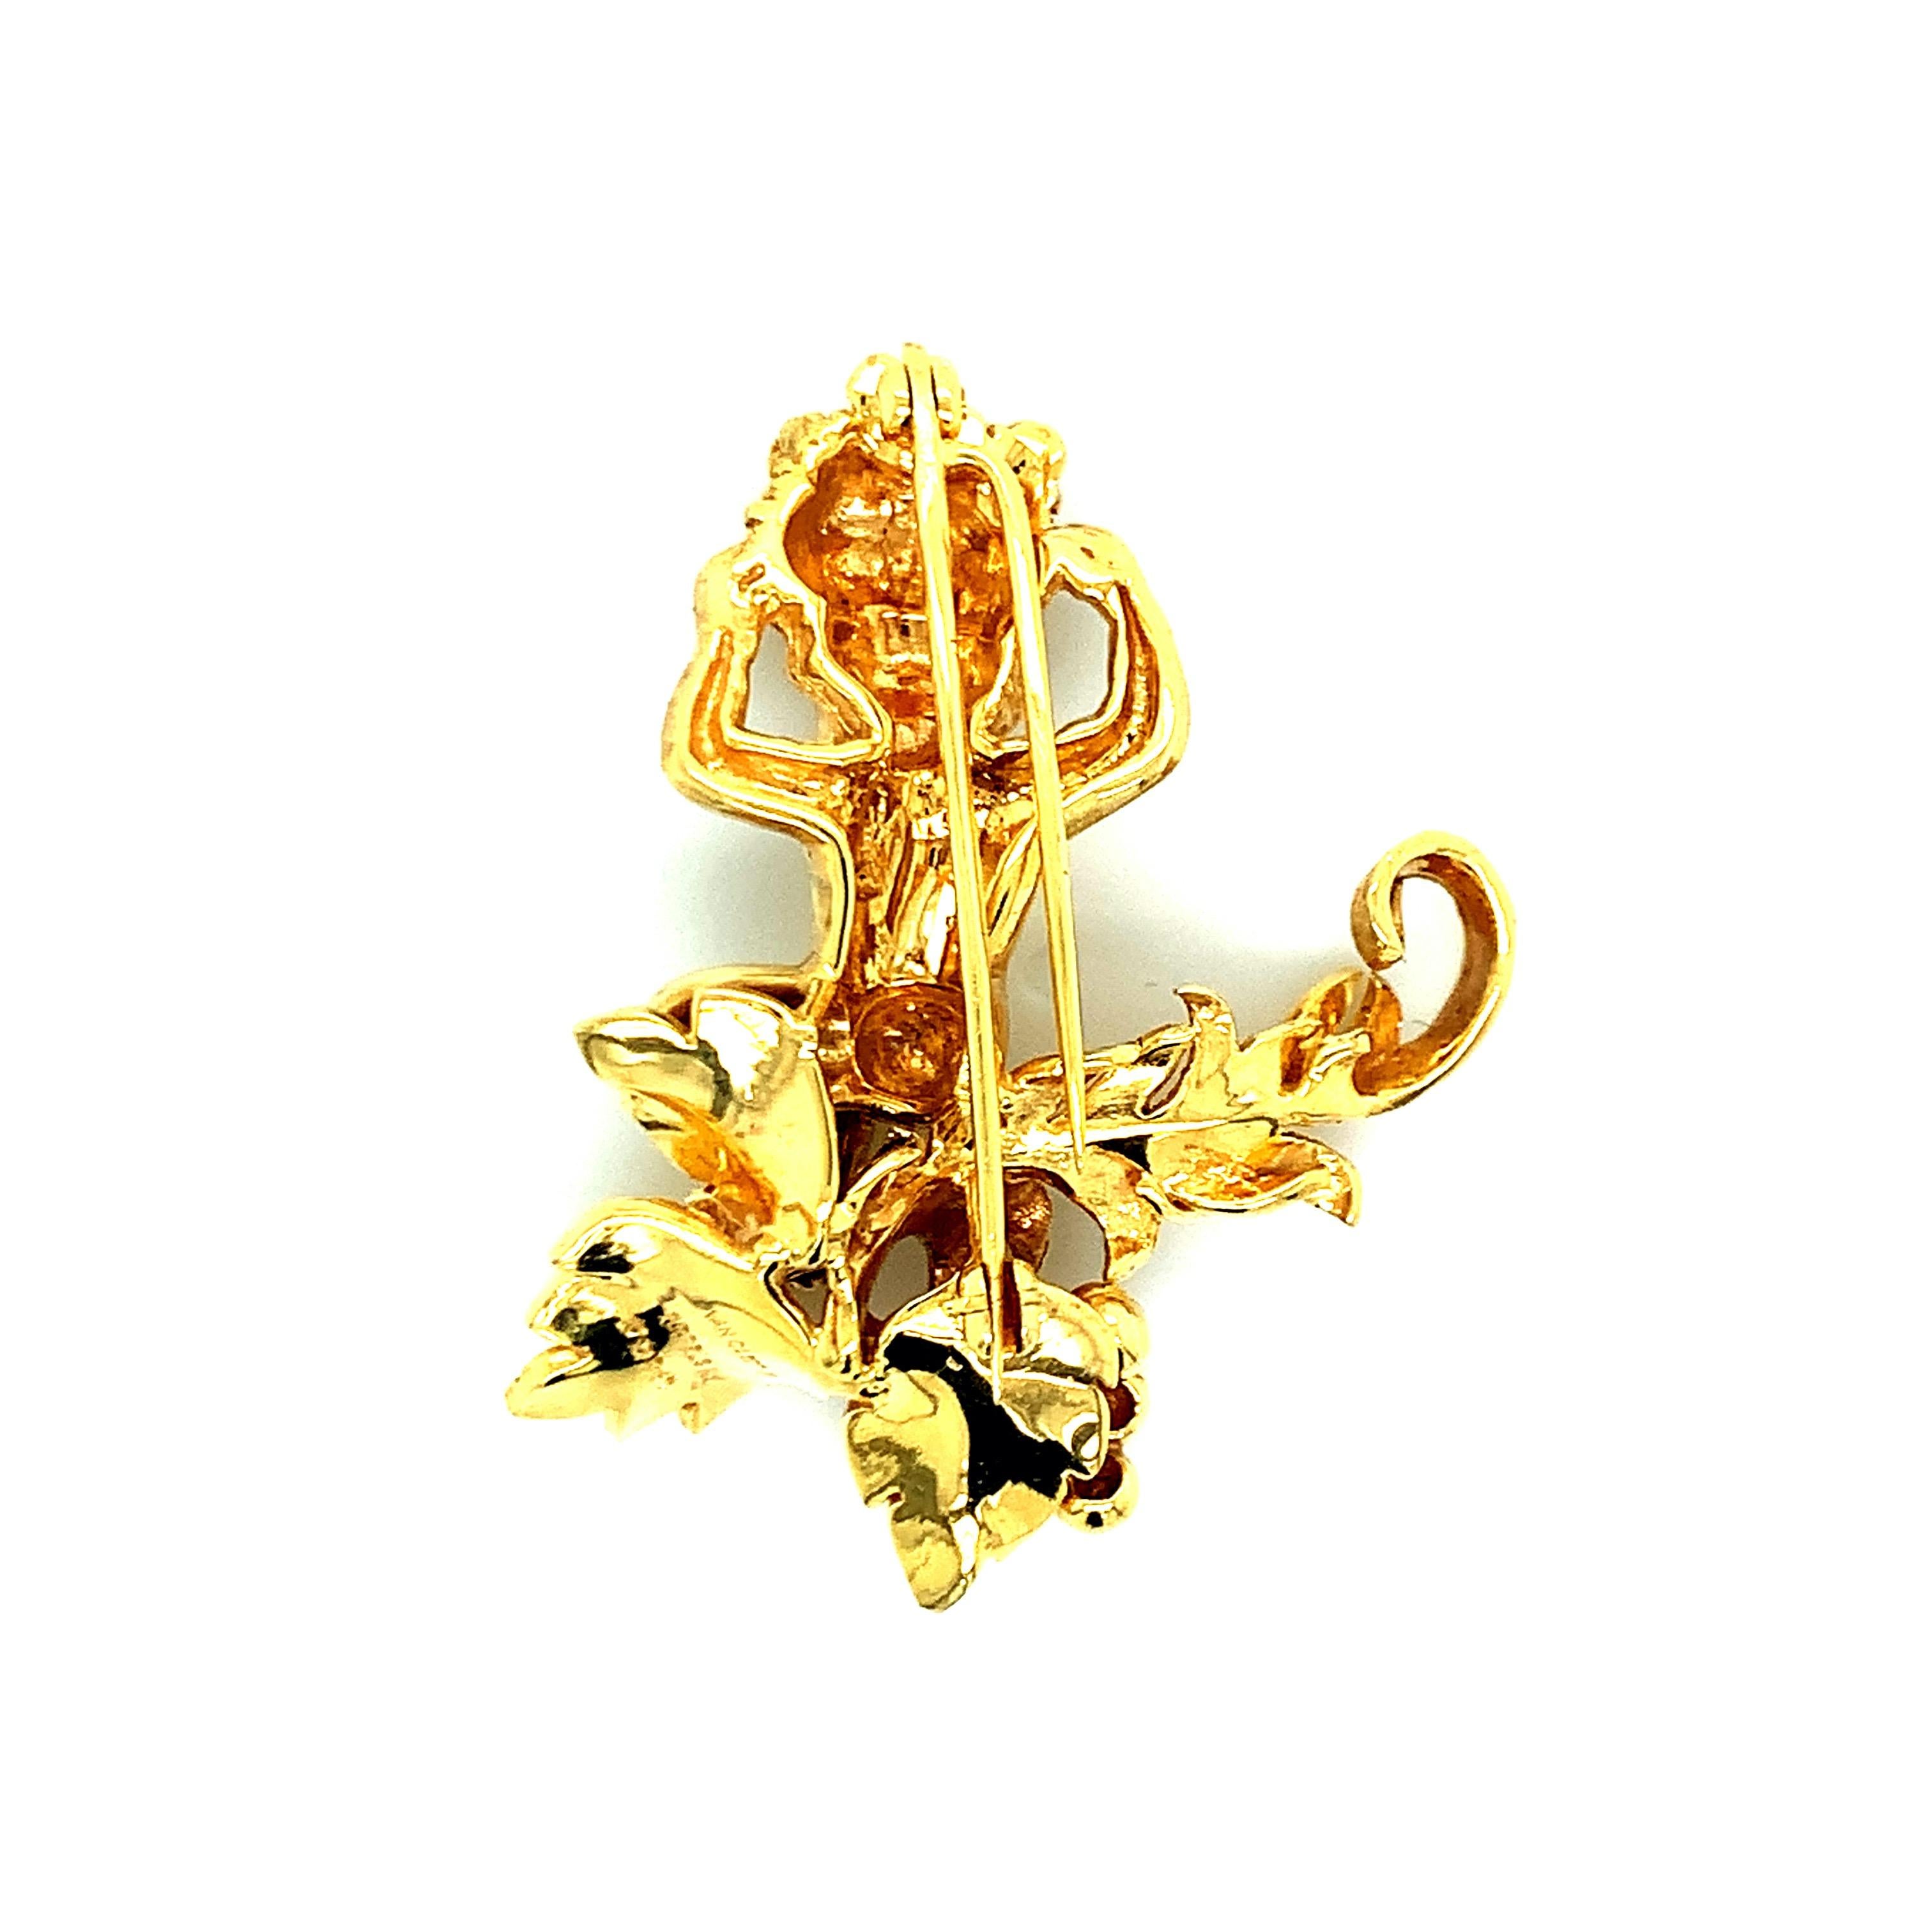 Van Cleef & Arpels 18 karat yellow gold brooch with a human motif, carrying a basket filled with various goods on her head. She is sitting on a grape vine. Total weight: 19.6 grams. Length: 4.4 cm. Width: 3.6 cm. 

Signed Van Cleef & Arpels